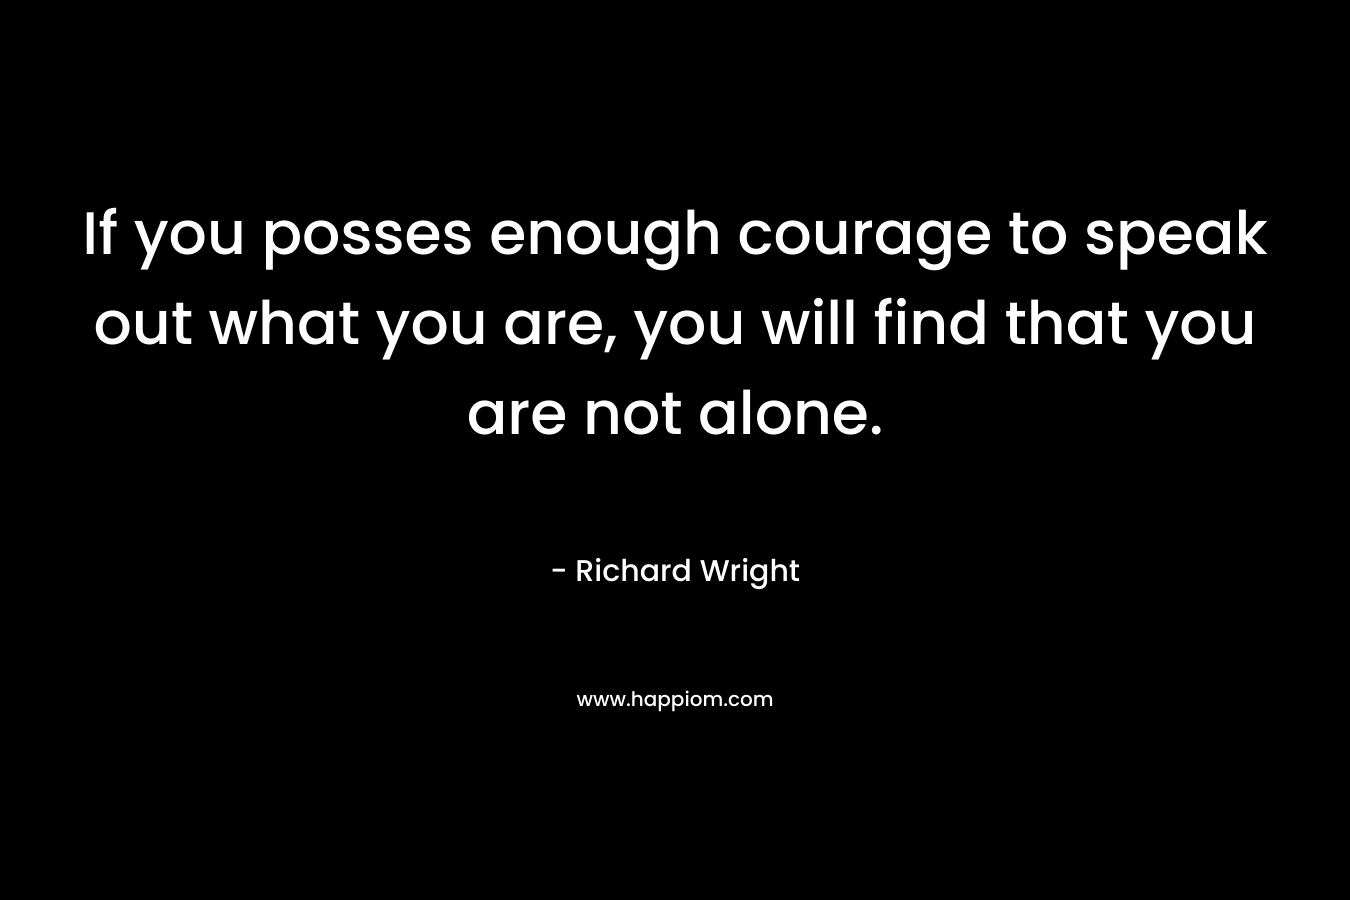 If you posses enough courage to speak out what you are, you will find that you are not alone.